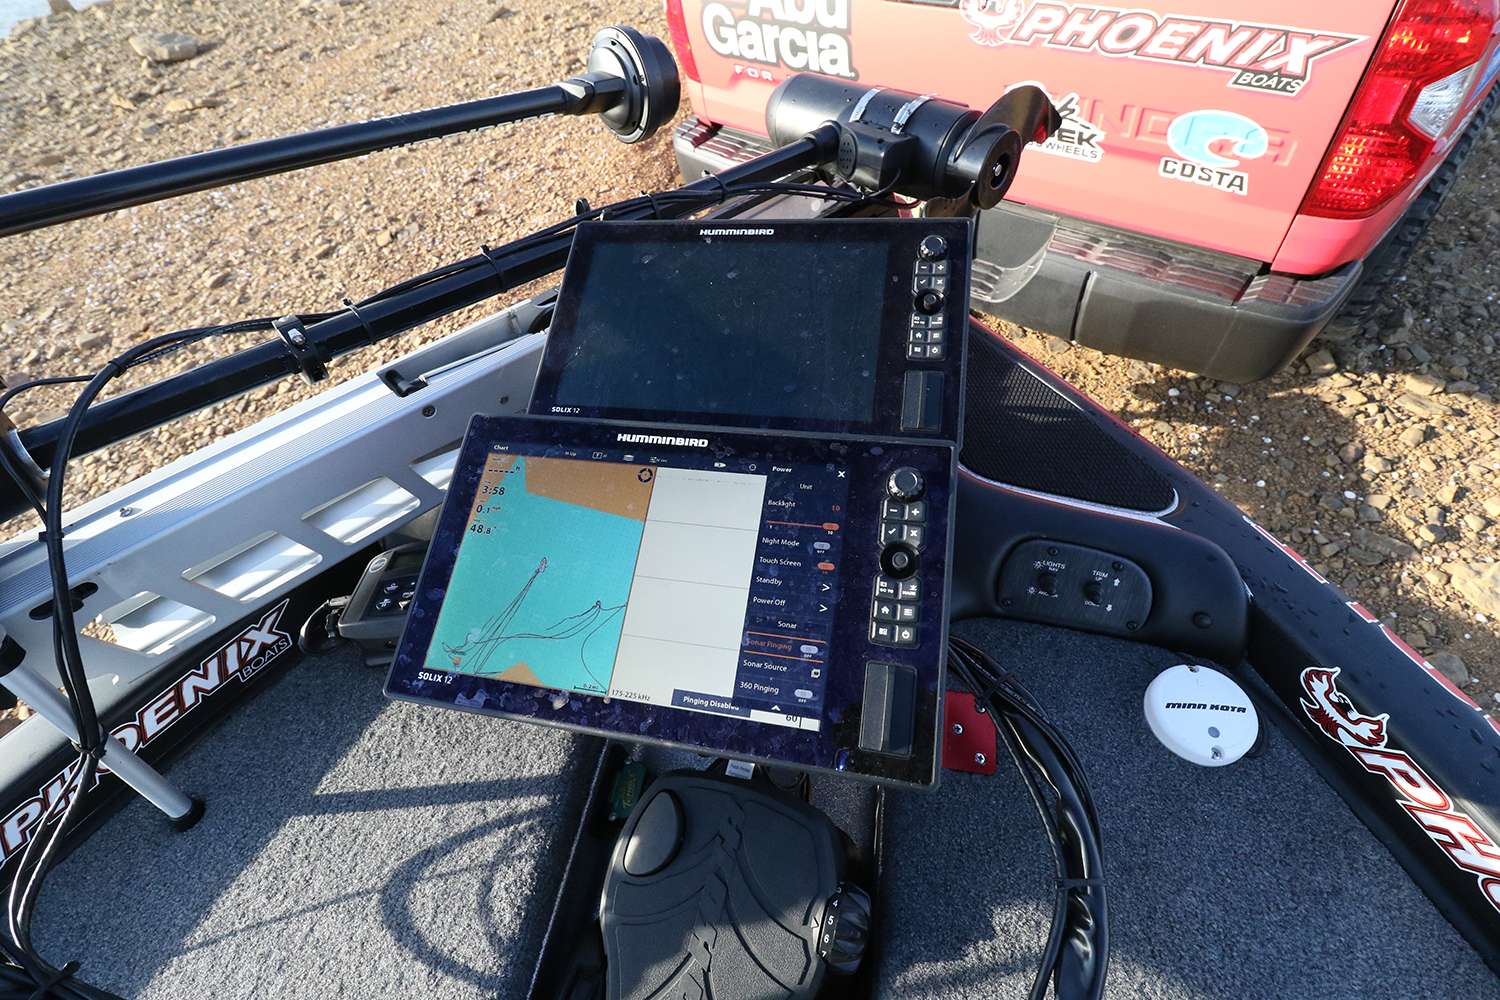 A pair of Humminbird Solix 12s provide the second-by-second information required to compete on the top level of the sport.